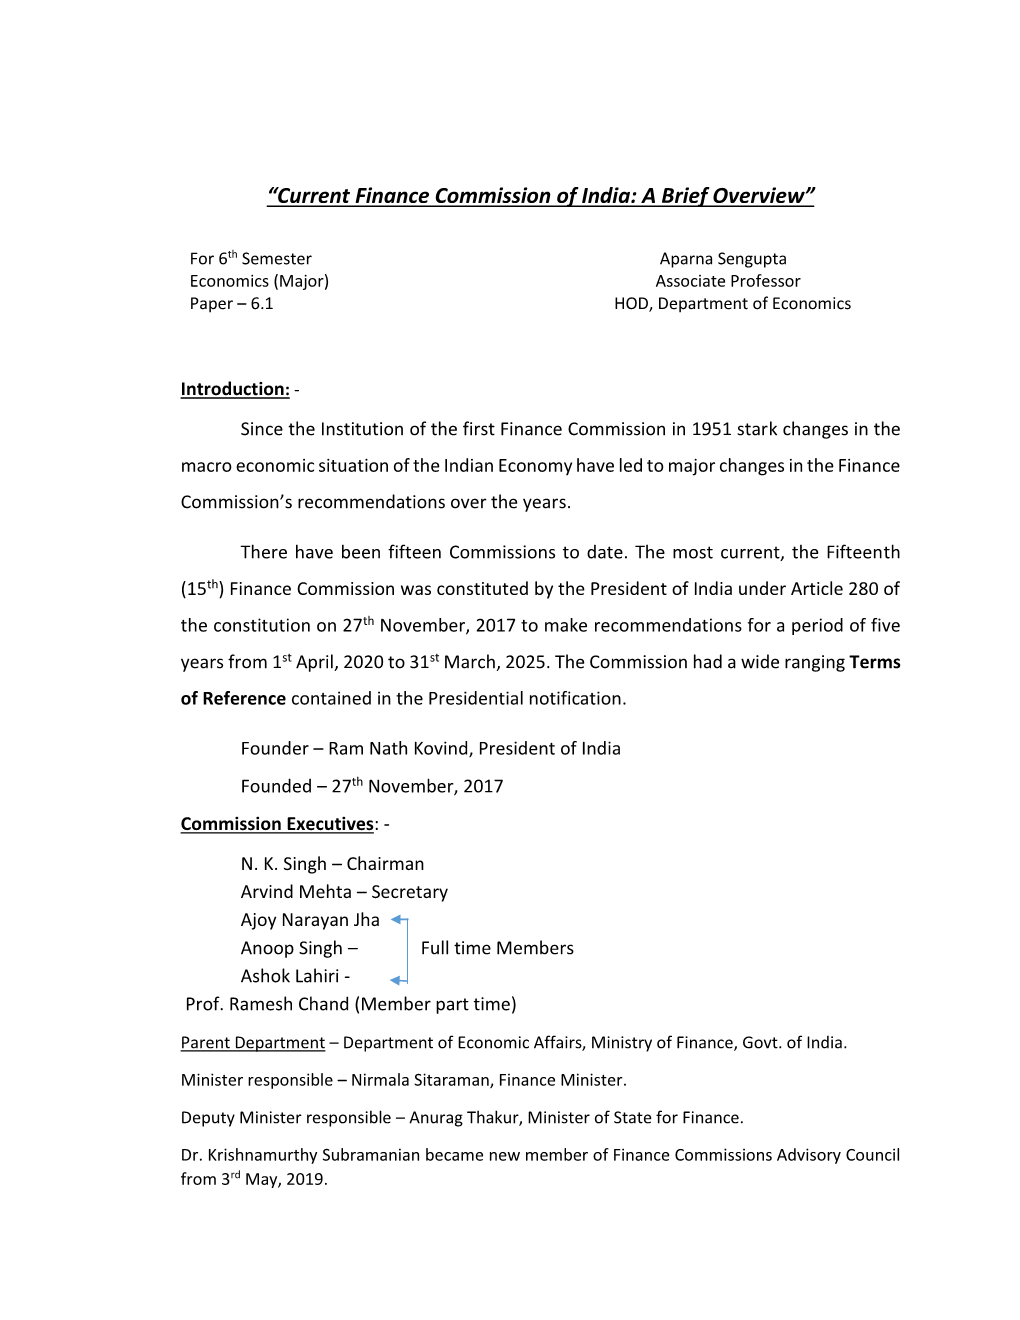 “Current Finance Commission of India: a Brief Overview”